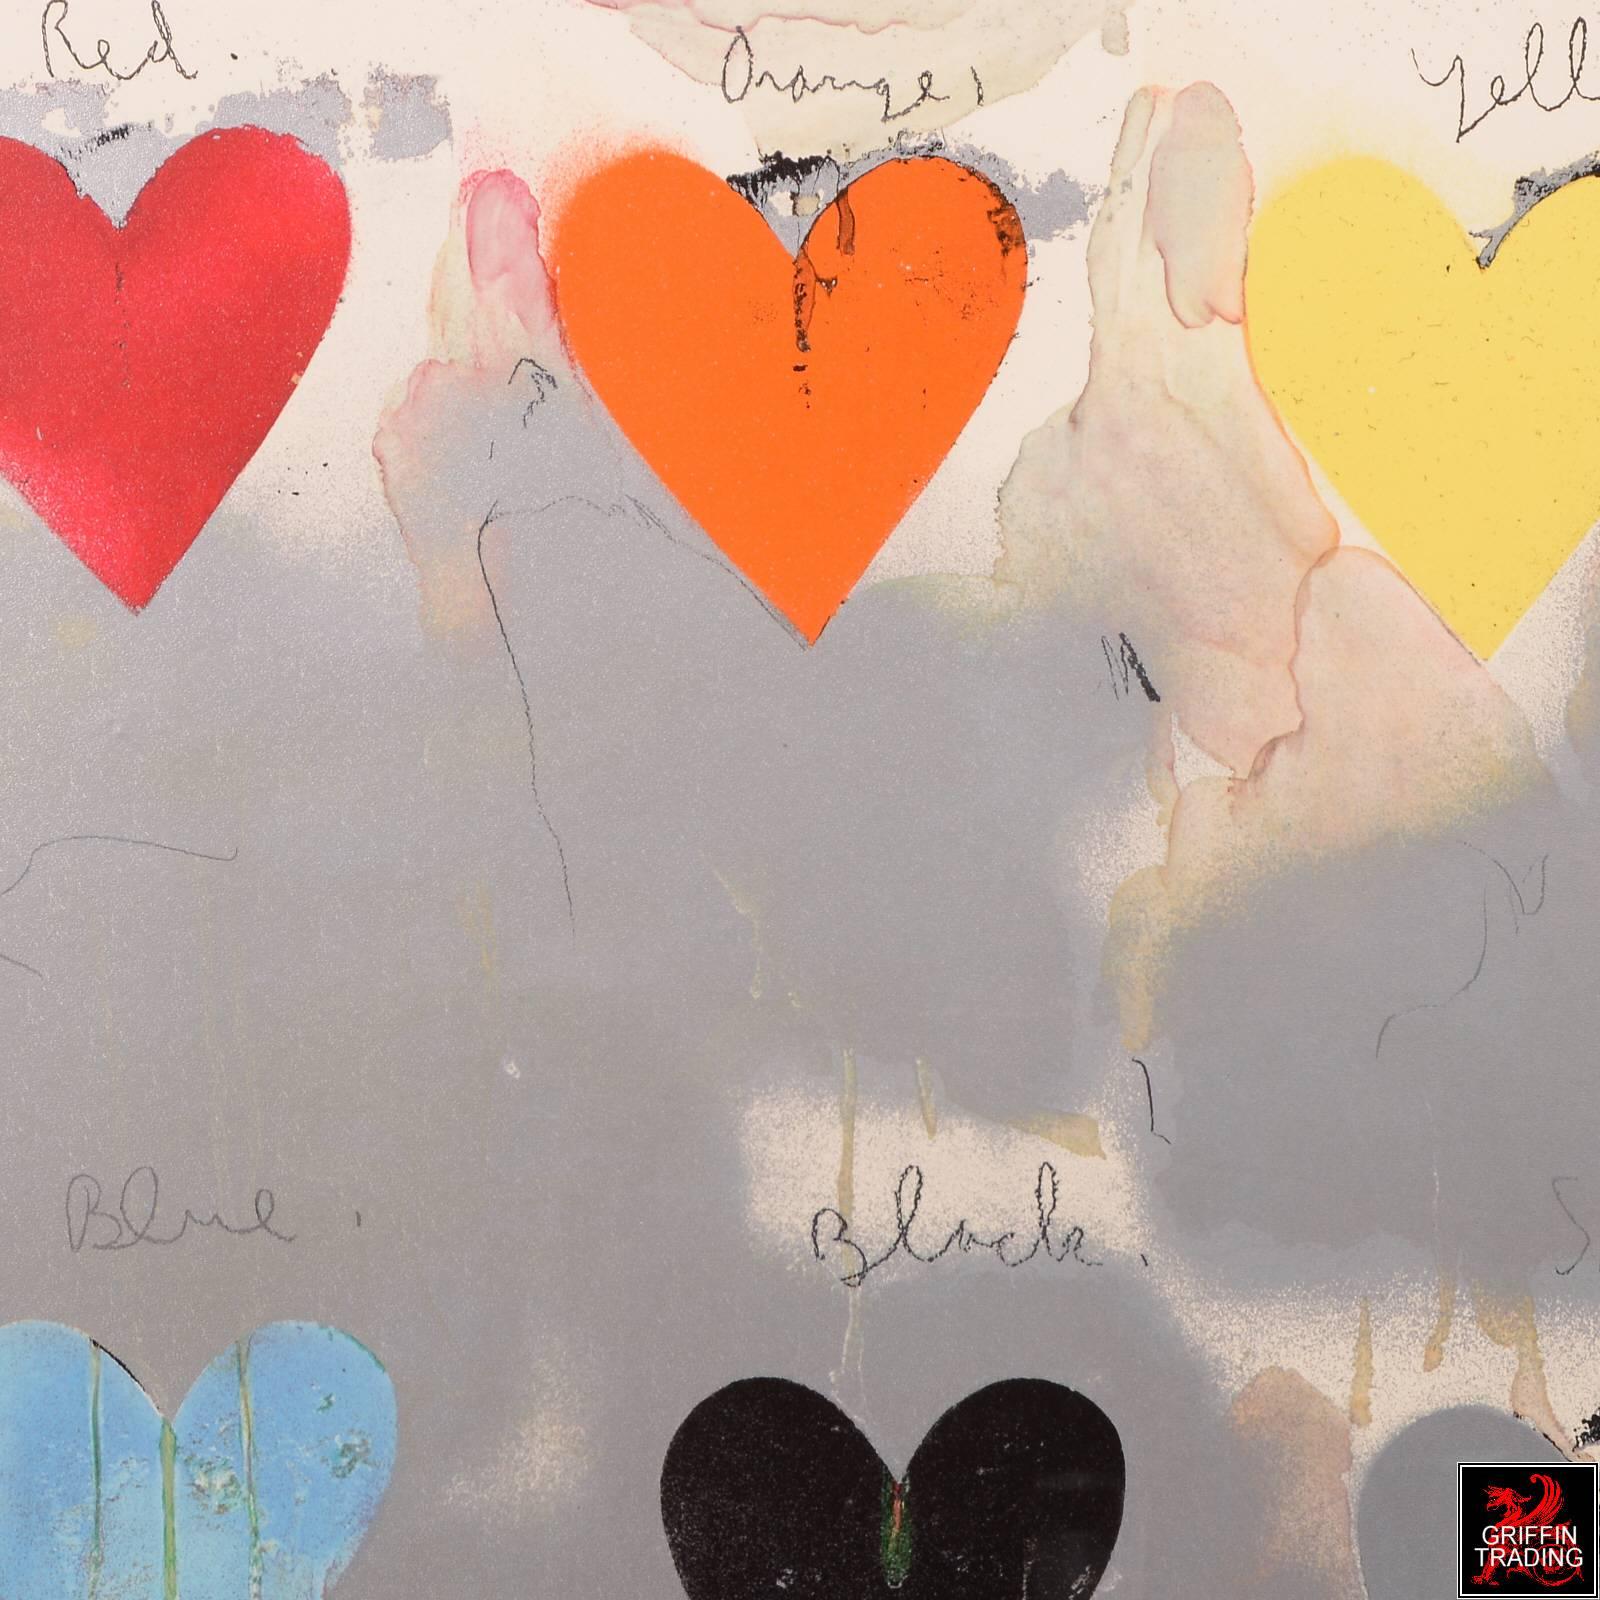 8 Eight Hearts Lithograph - Pop Art Print by (after) Jim Dine